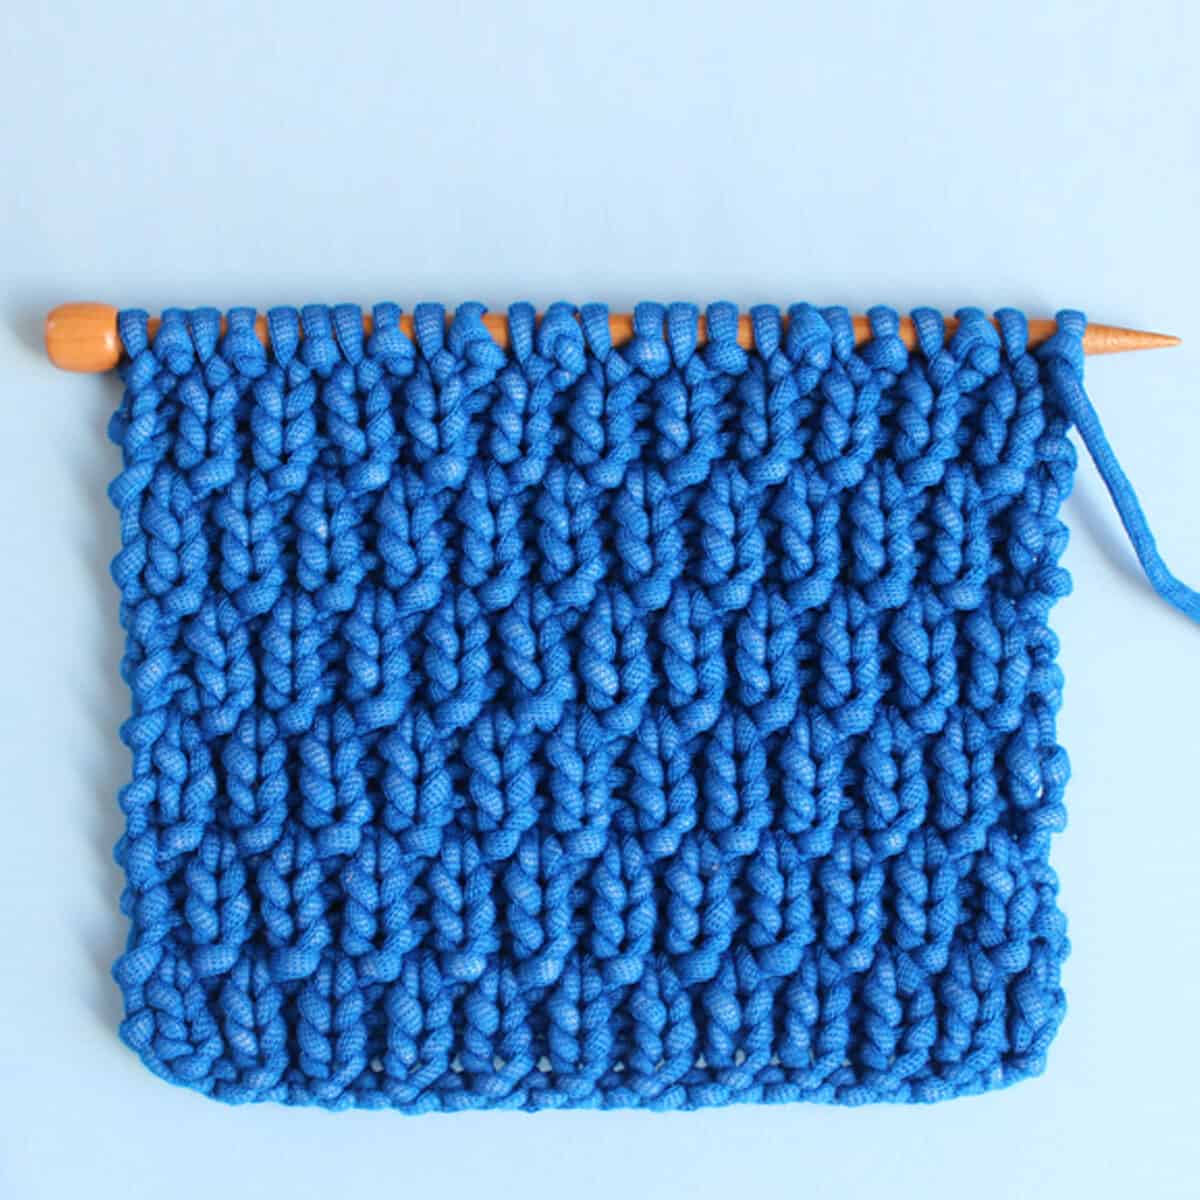 Long Raindrops Knit Stitch Pattern in bright blue yarn color on knitting needle atop a light blue background.